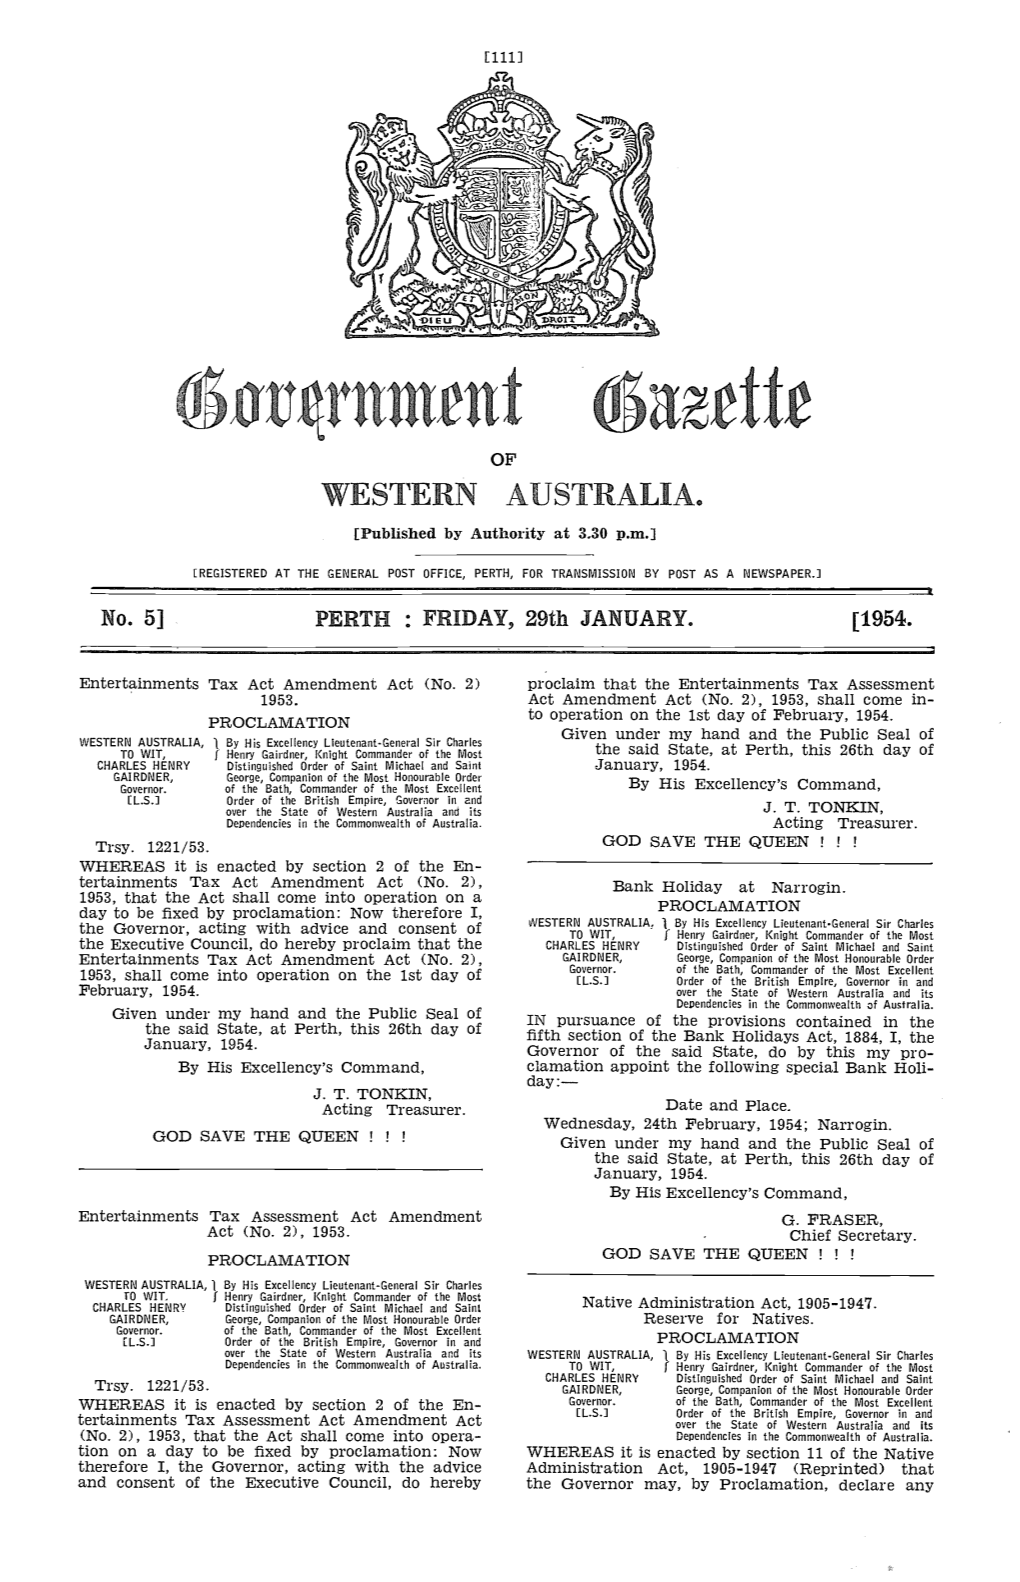 WST RN AUSTRALIA. [Published by Authority at 3.30 P.M.]